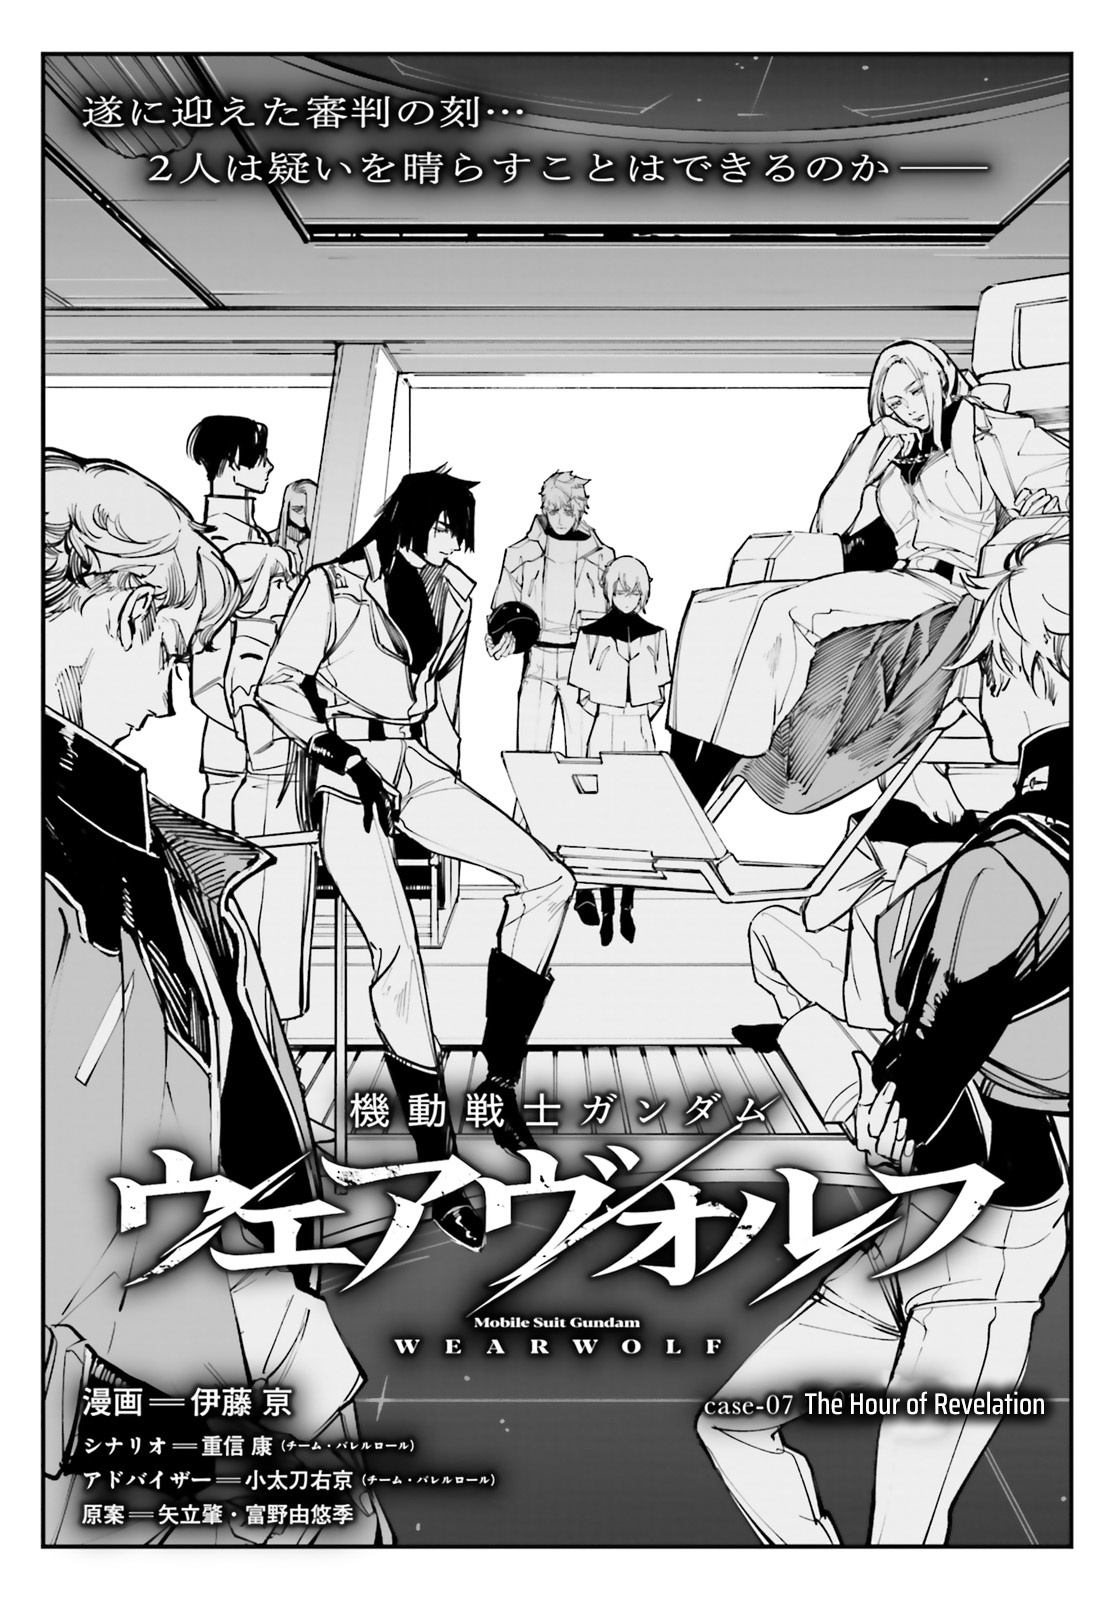 Mobile Suit Gundam Wearwolf Chapter 7: Case-07 [The Hour Of Revelation] - Picture 1